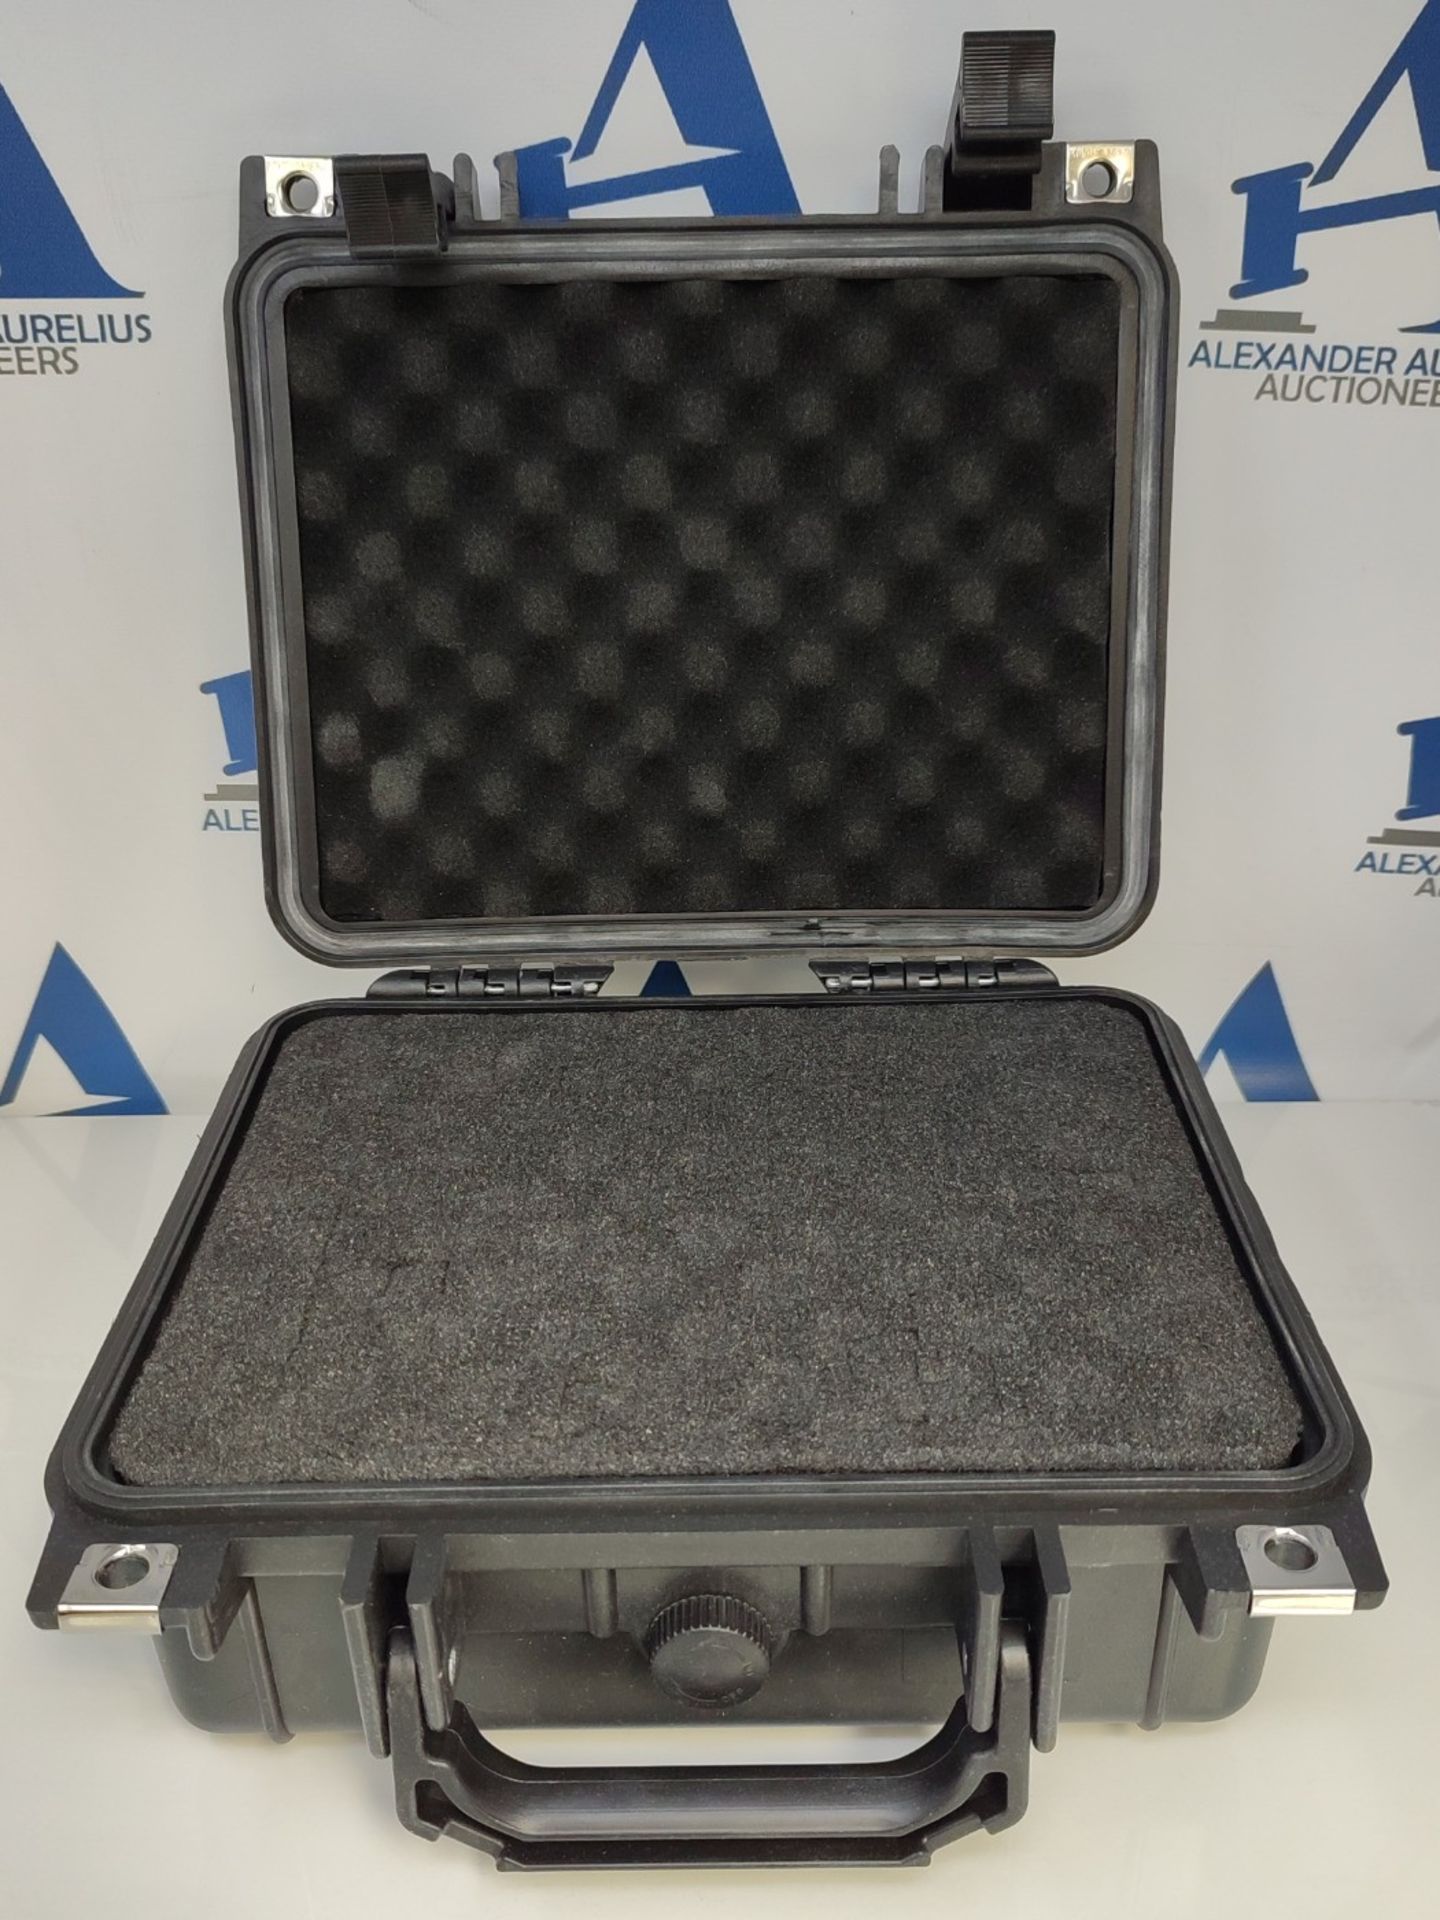 HMF ODK100 Outdoor Photo Case, Transport Case with Grid Foam | 27 x 24.5 x 13 cm - Image 4 of 4